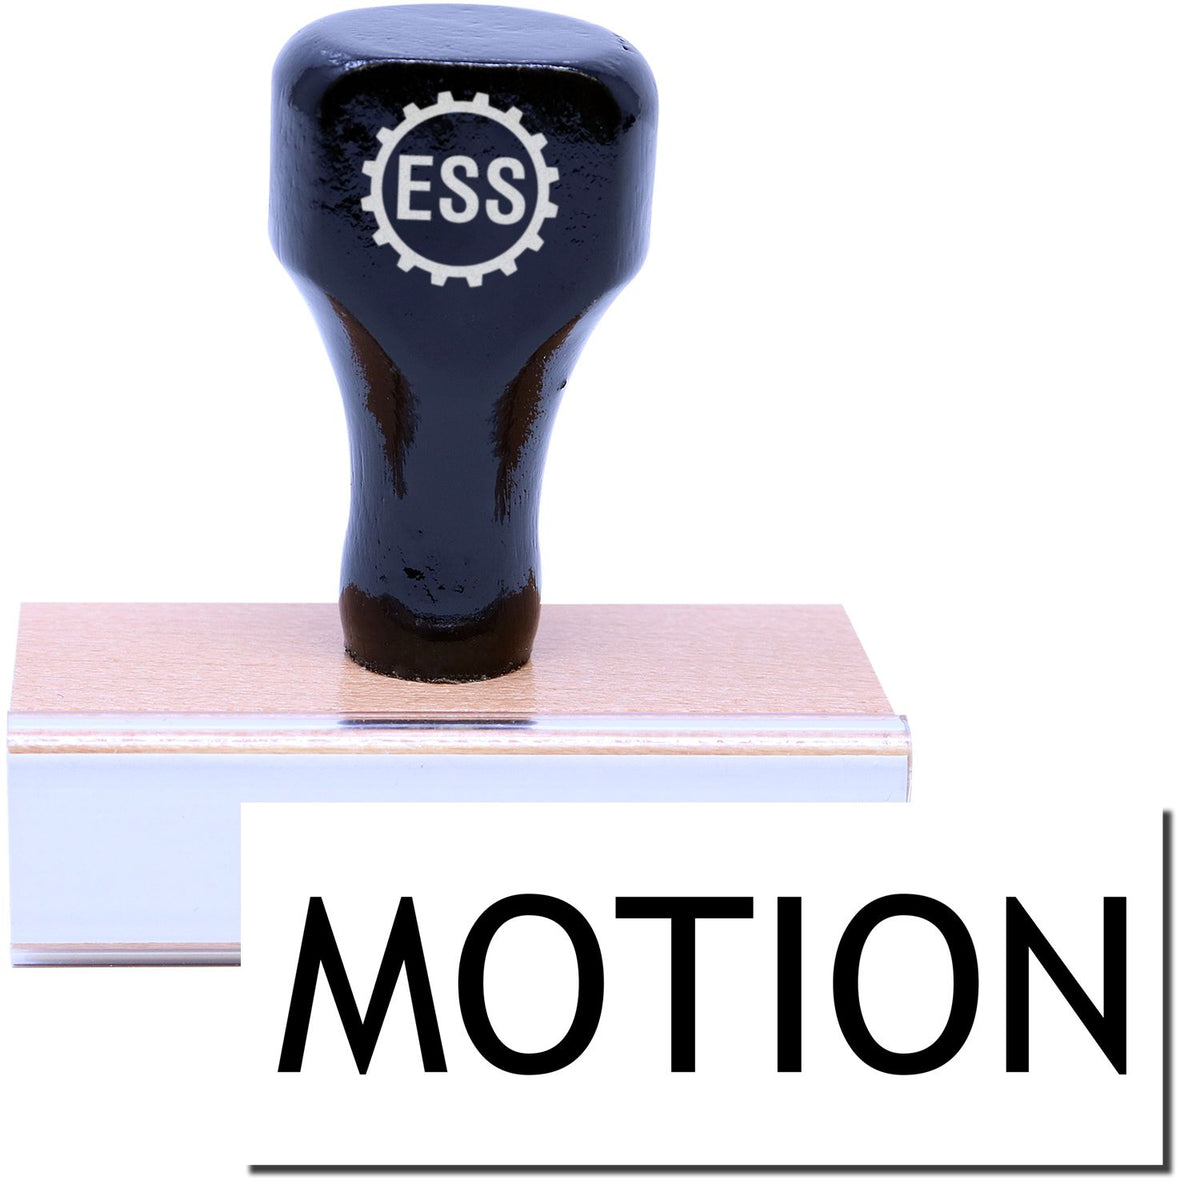 A stock office rubber stamp with a stamped image showing how the text &quot;MOTION&quot; is displayed after stamping.